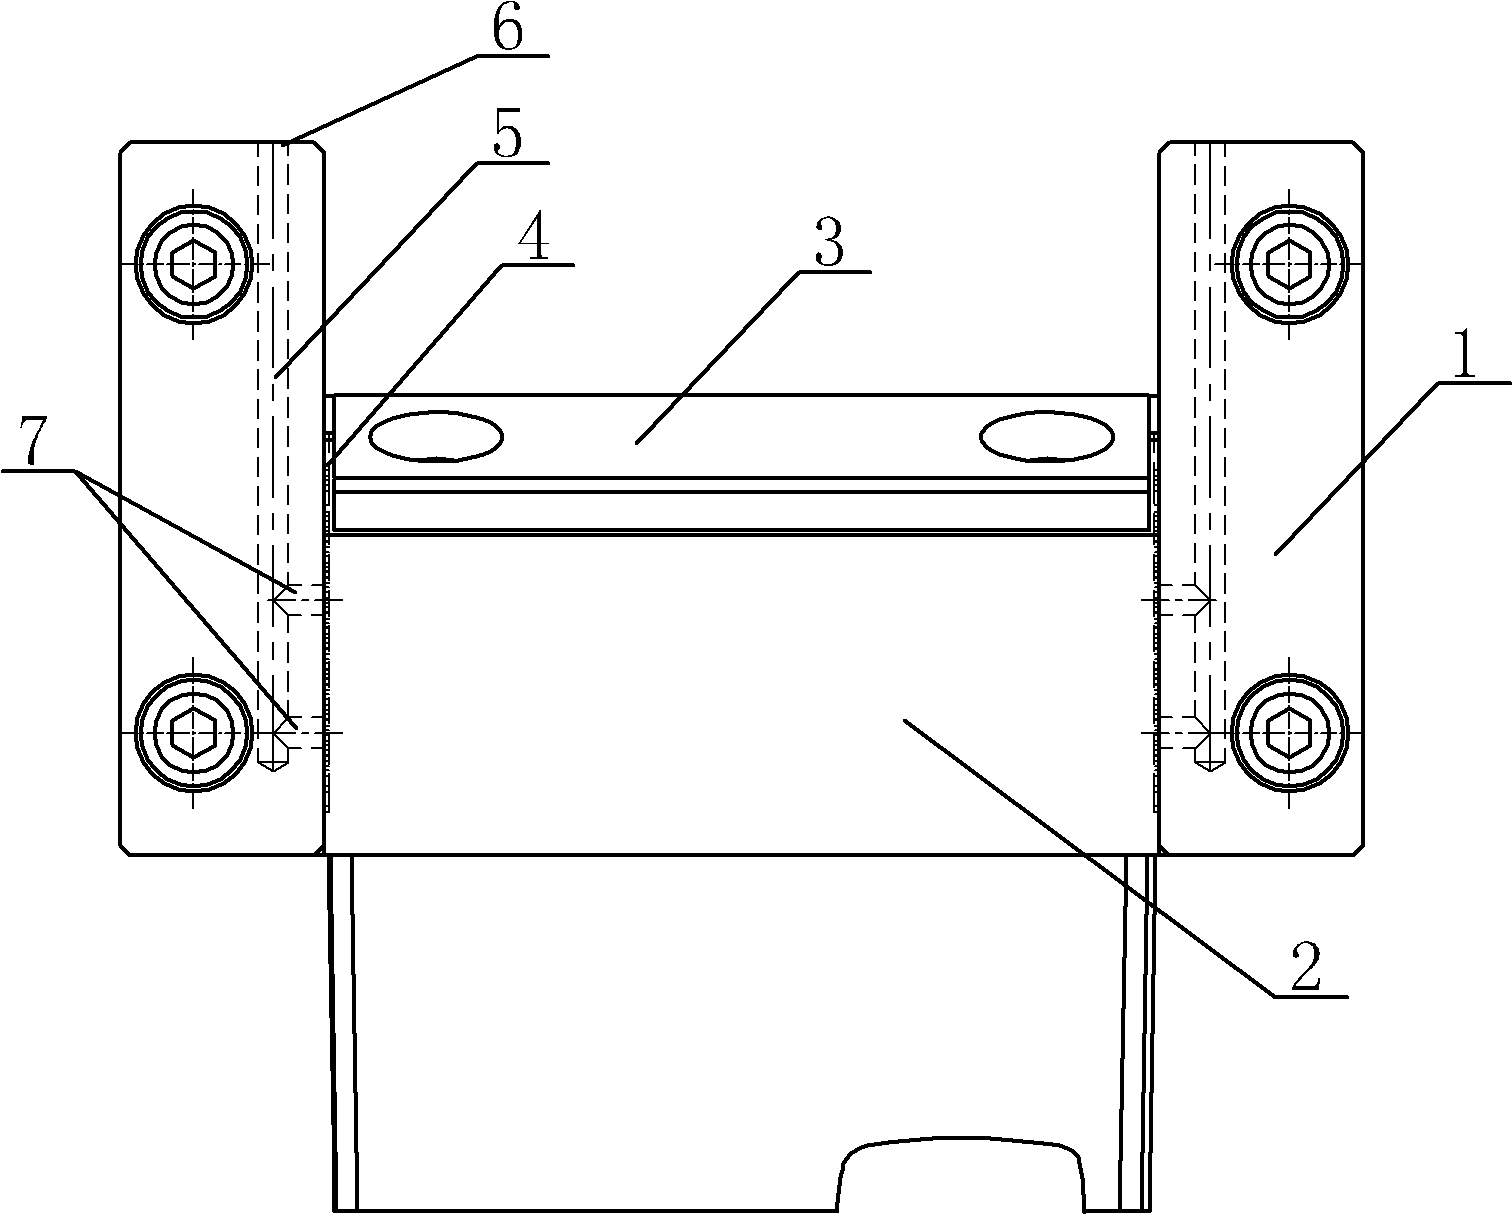 Self-lubricating line guide rail structure